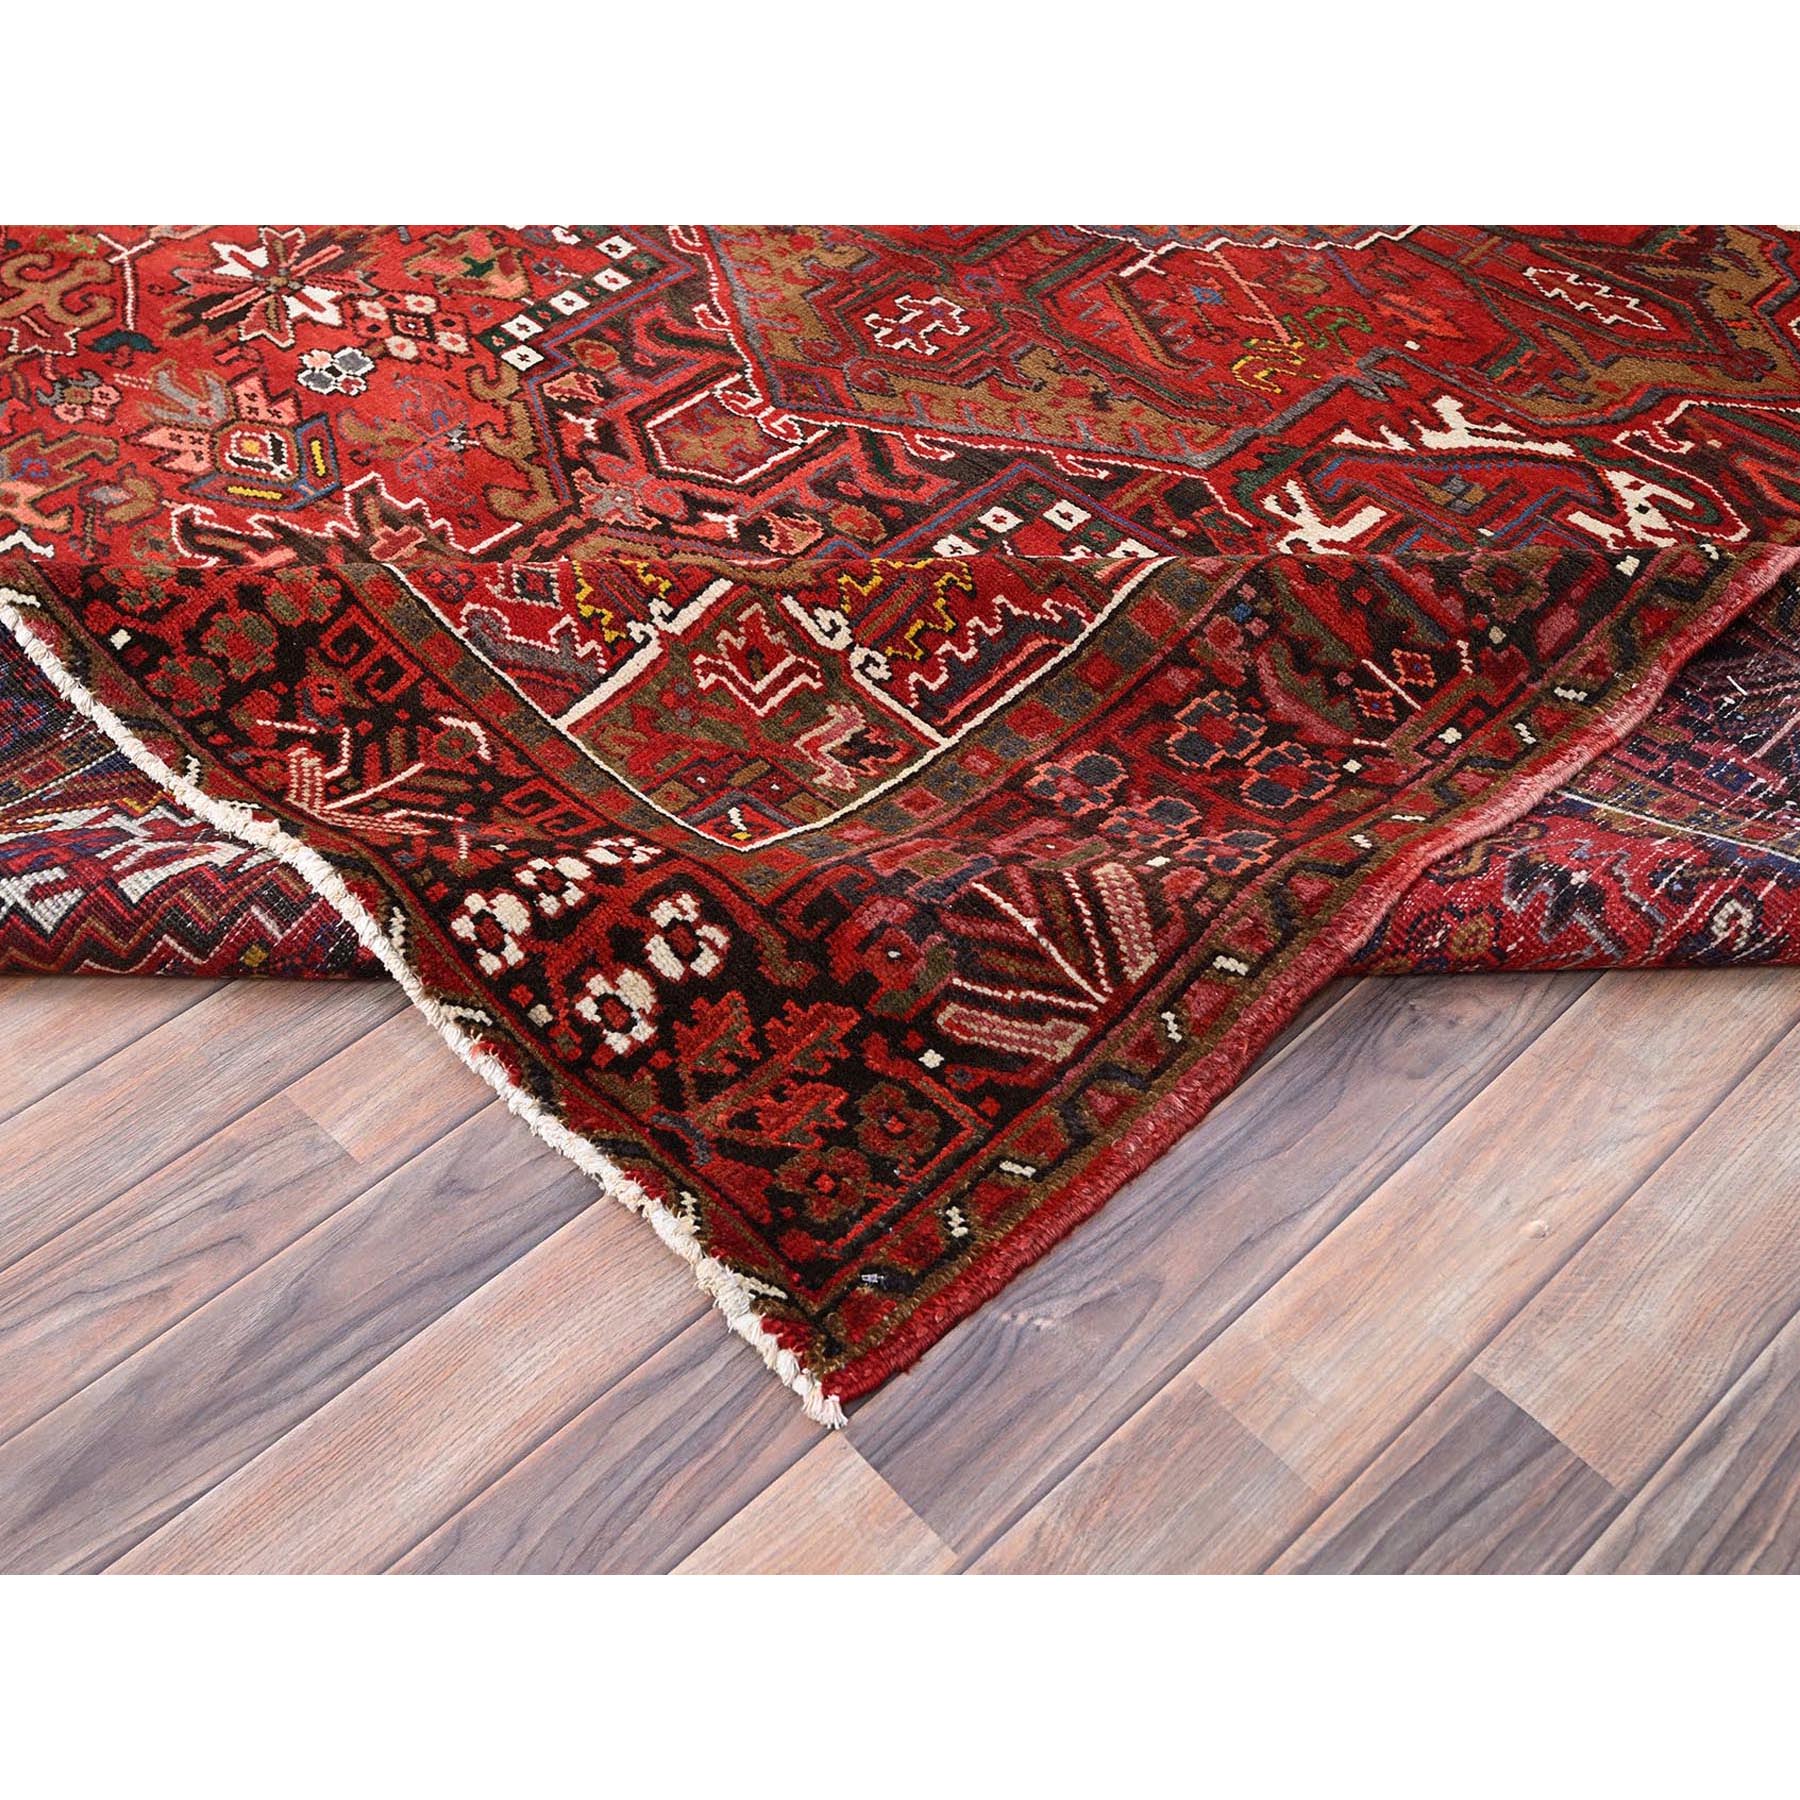 8'2"x11'3" Imperial Red, Semi Antique Persian Heriz, Good Condition, Rustic Feel, Worn Wool, Hand Woven, Oriental Rug 